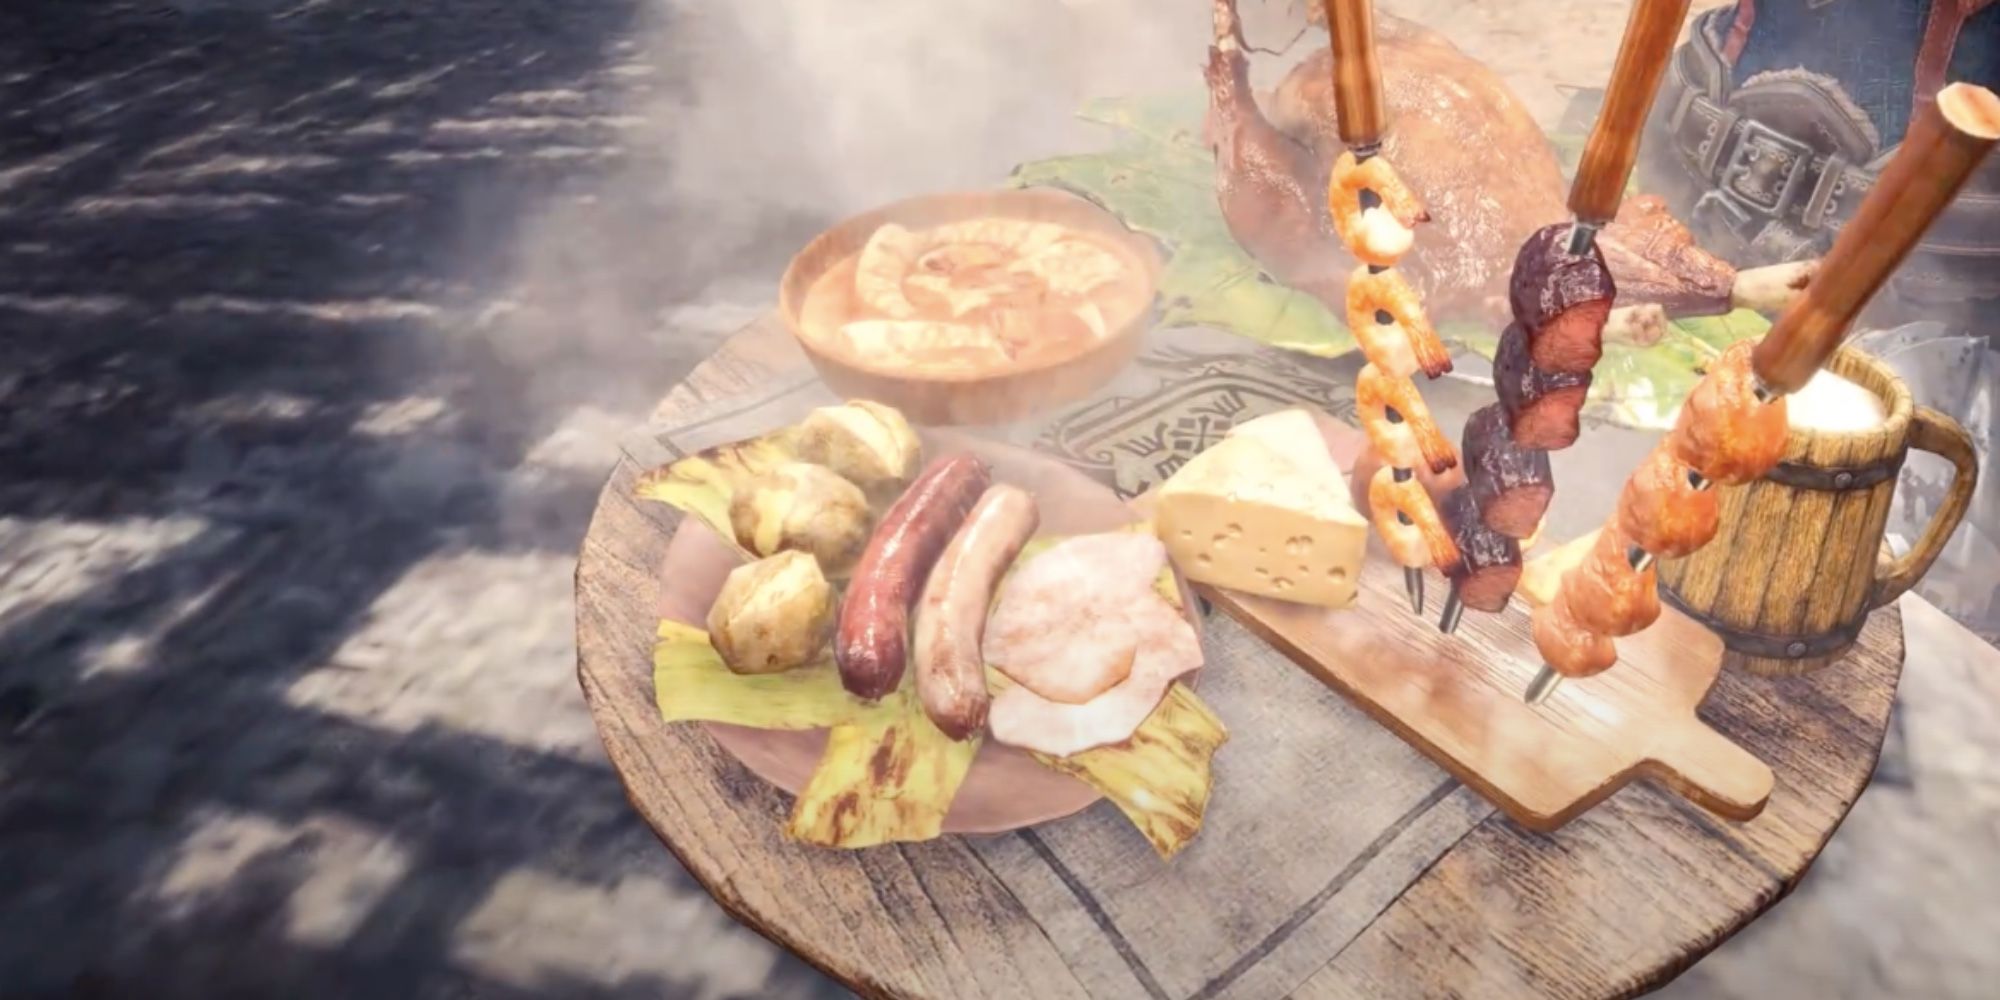 a meal from the canteen in monster hunter world